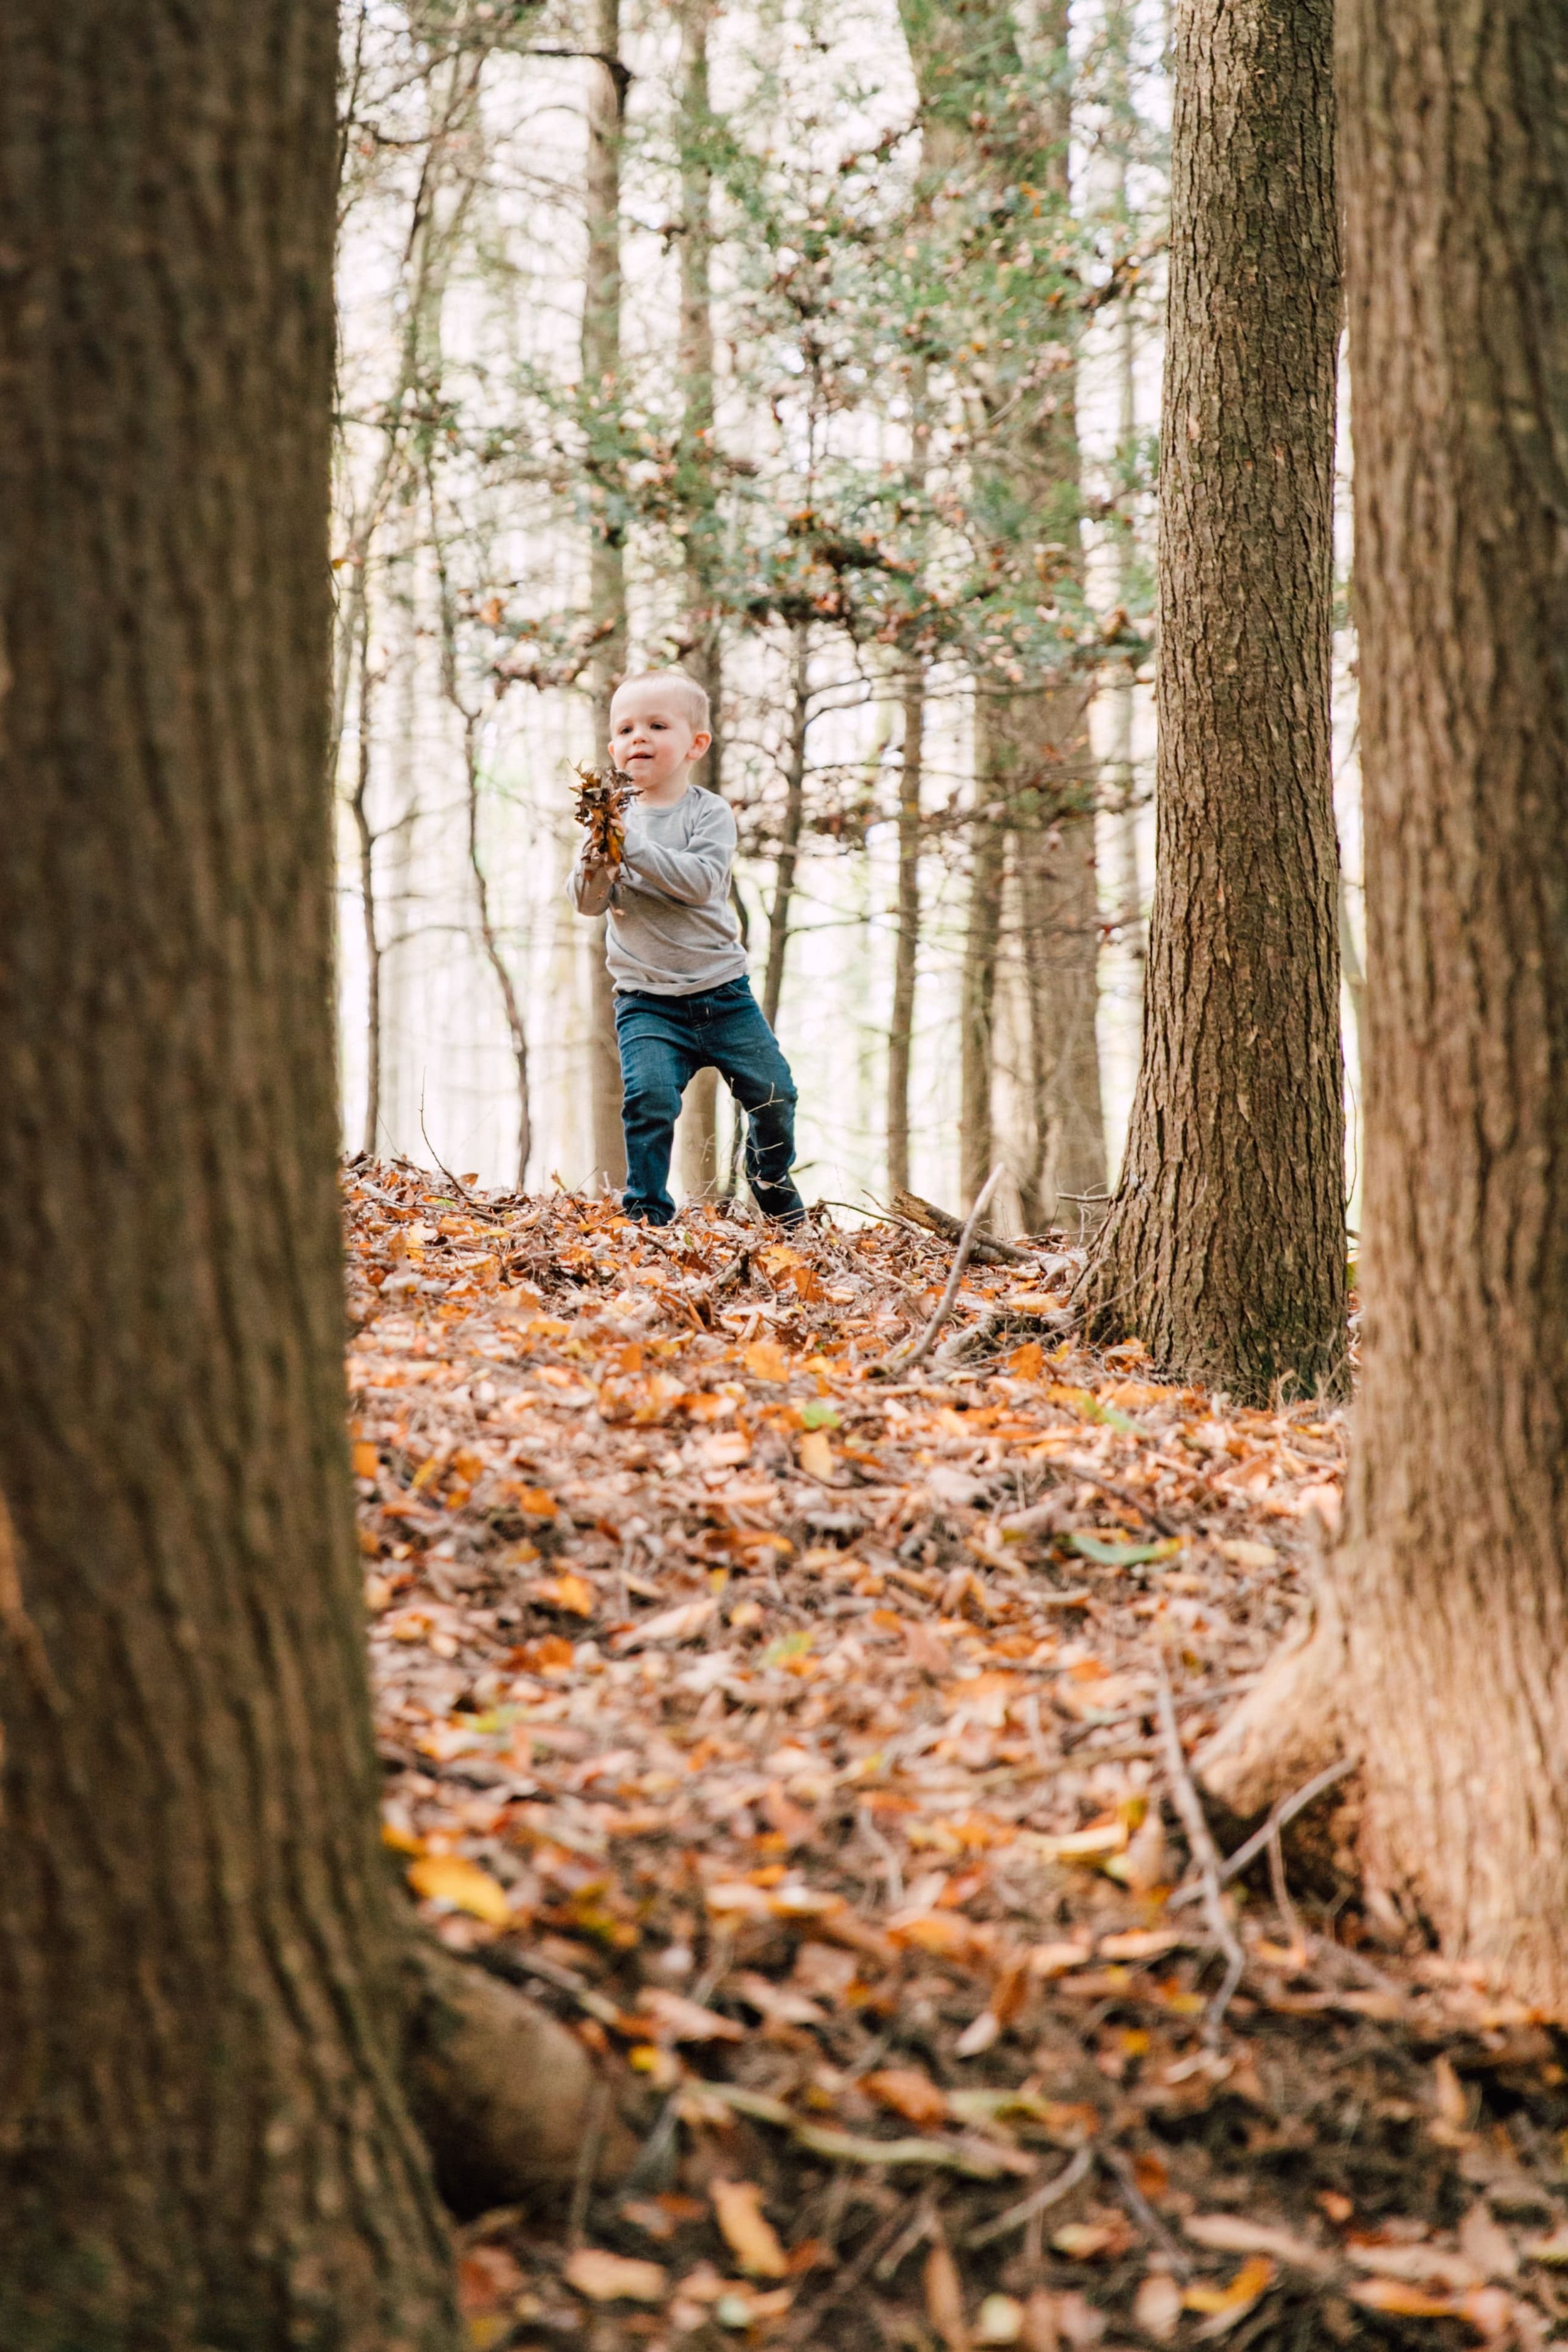  a child stands in the distance holding a pile of fall leaves during his parent’s backyard photoshoot 